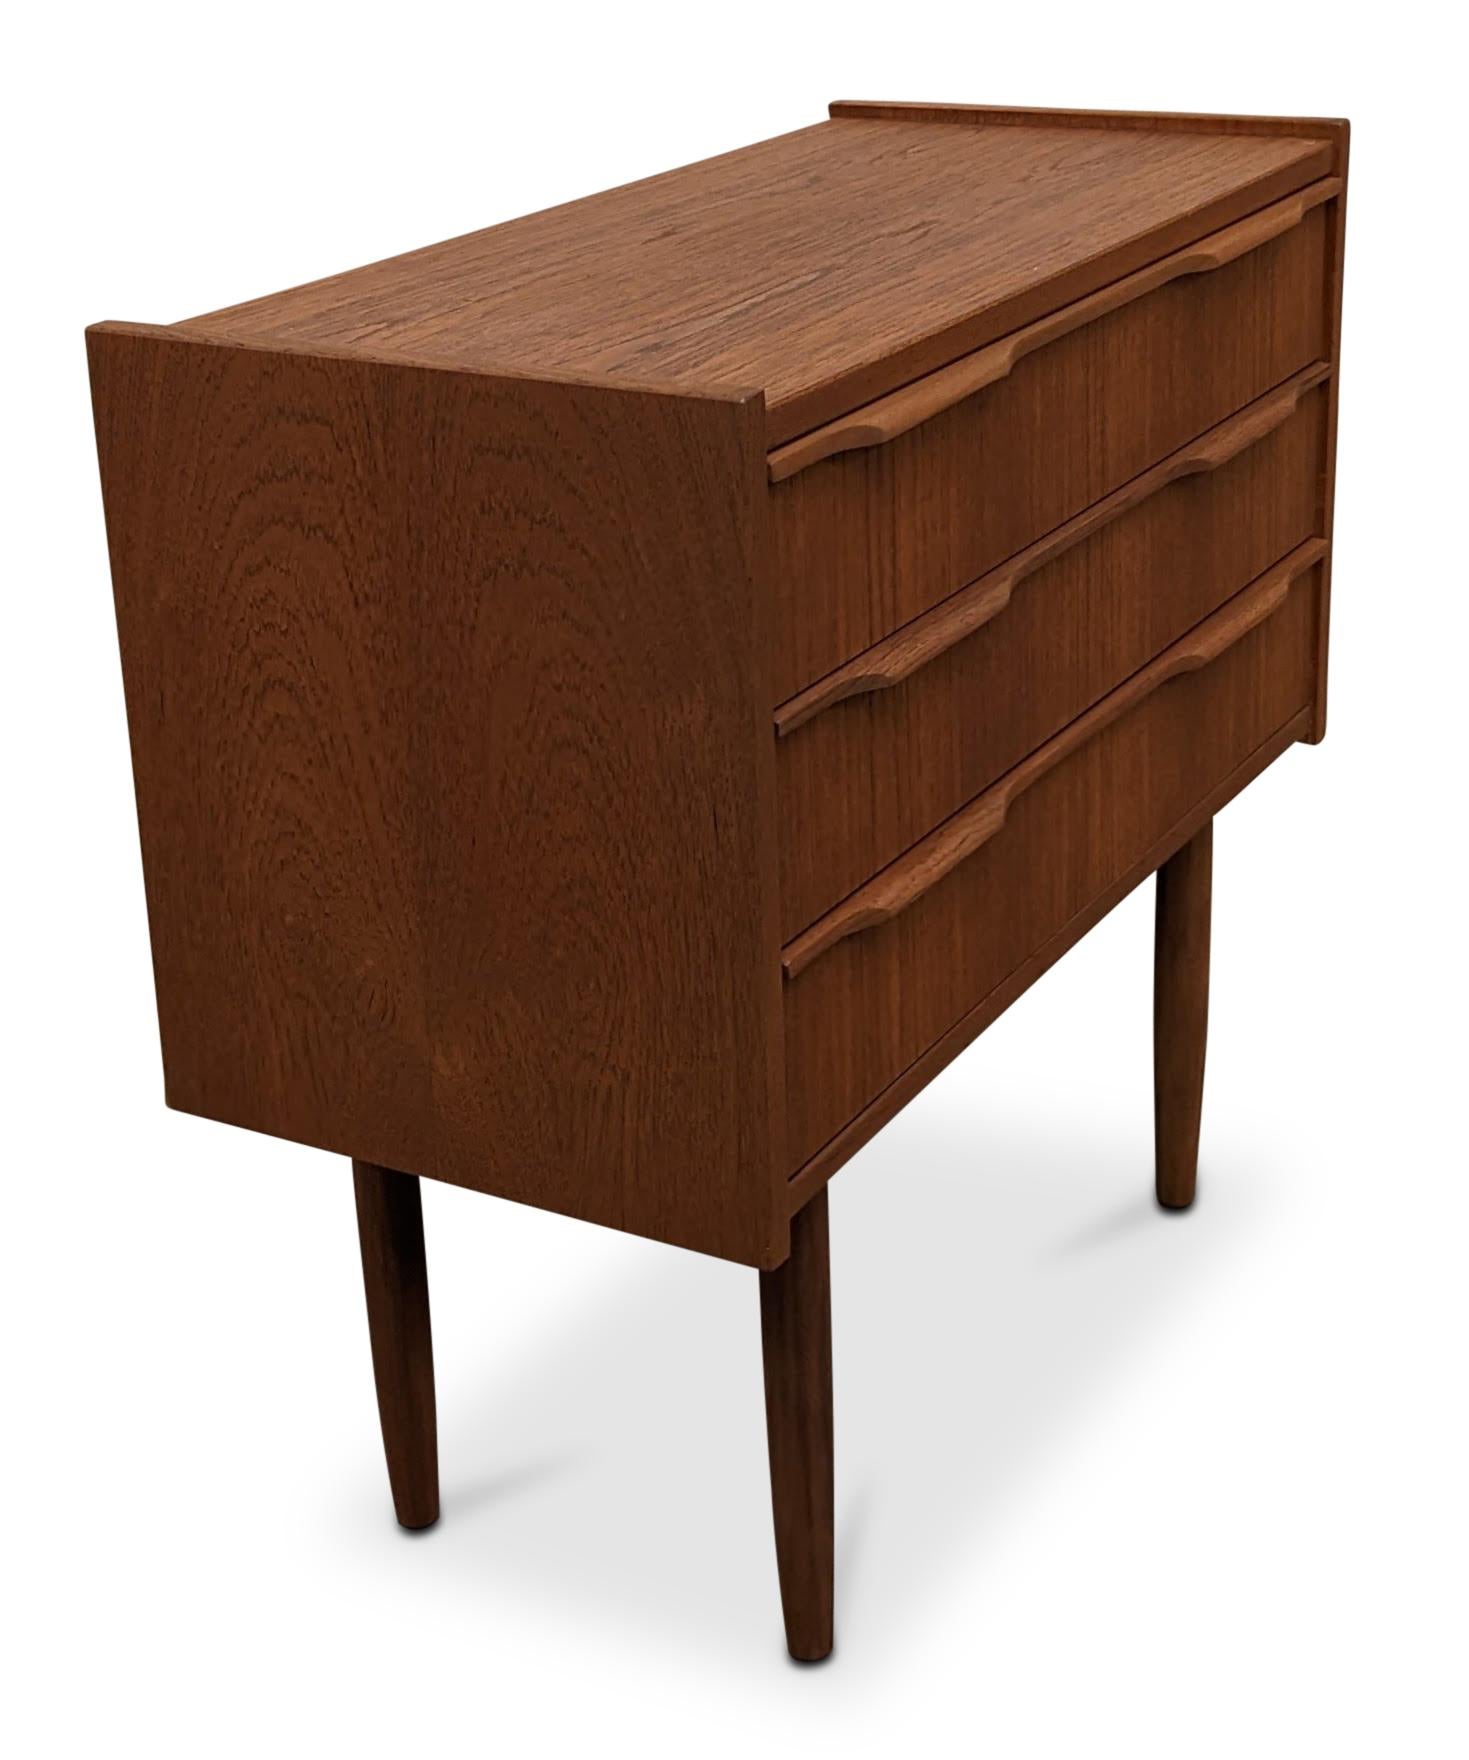 Vintage Danish Mid-Century Modern, made in the 1950s - Recently refurbished

These pieces are more than 65+ years old and some wear and tear can be expected, but we do everything we can to refurbish them in respect to the design.

There is a